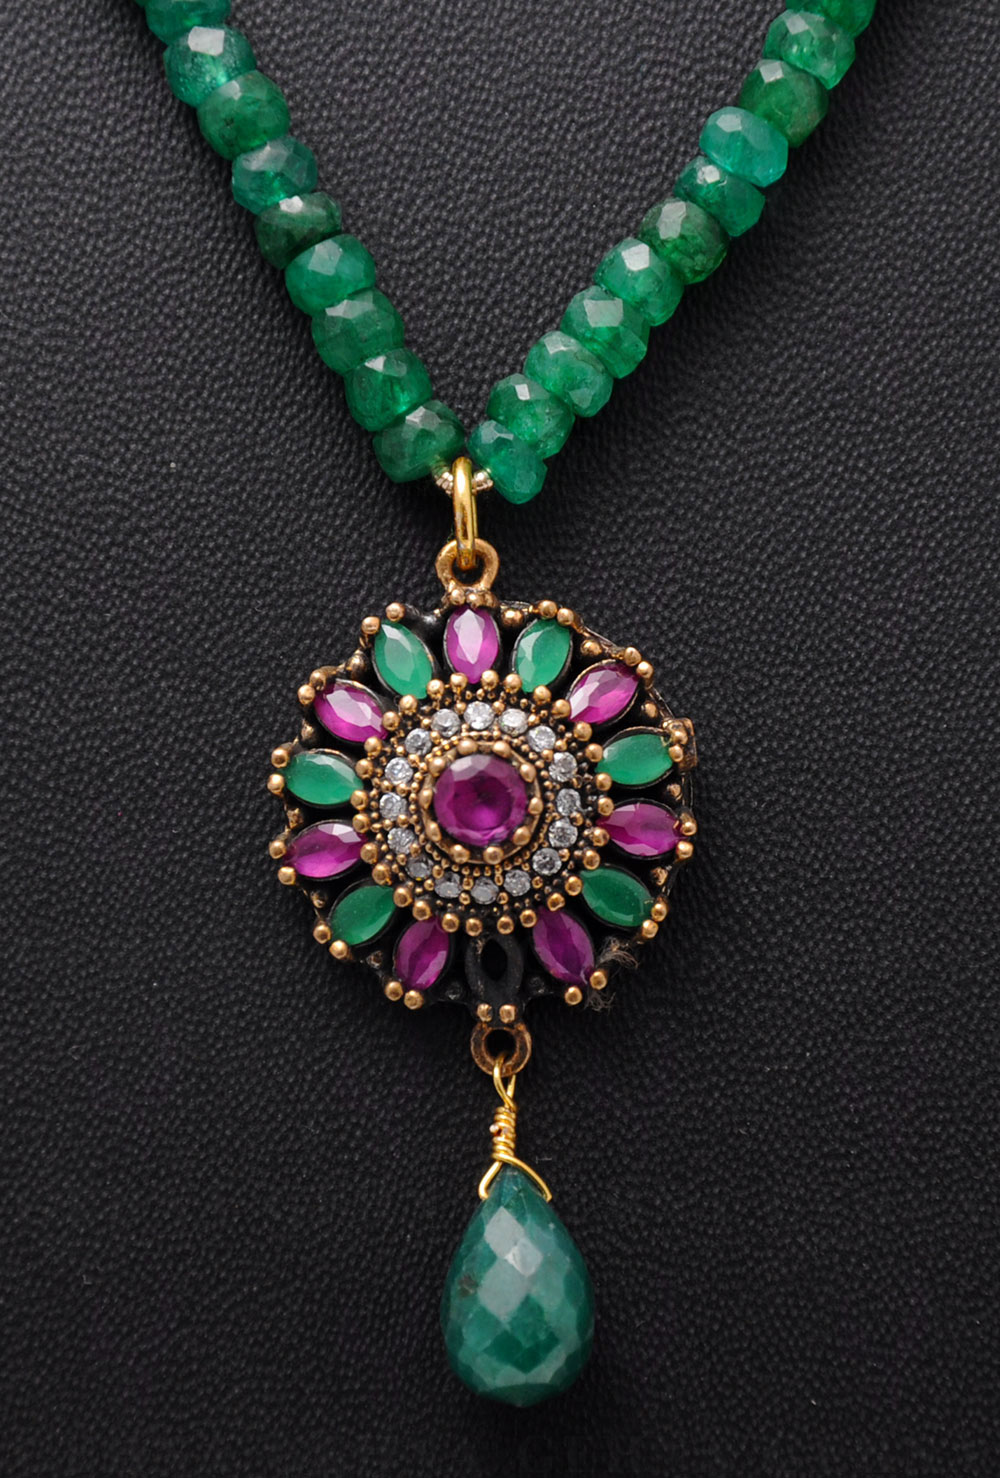 Emerald & Ruby Gemstone Bead Necklace With Silver Pendant & Earring NP-1376